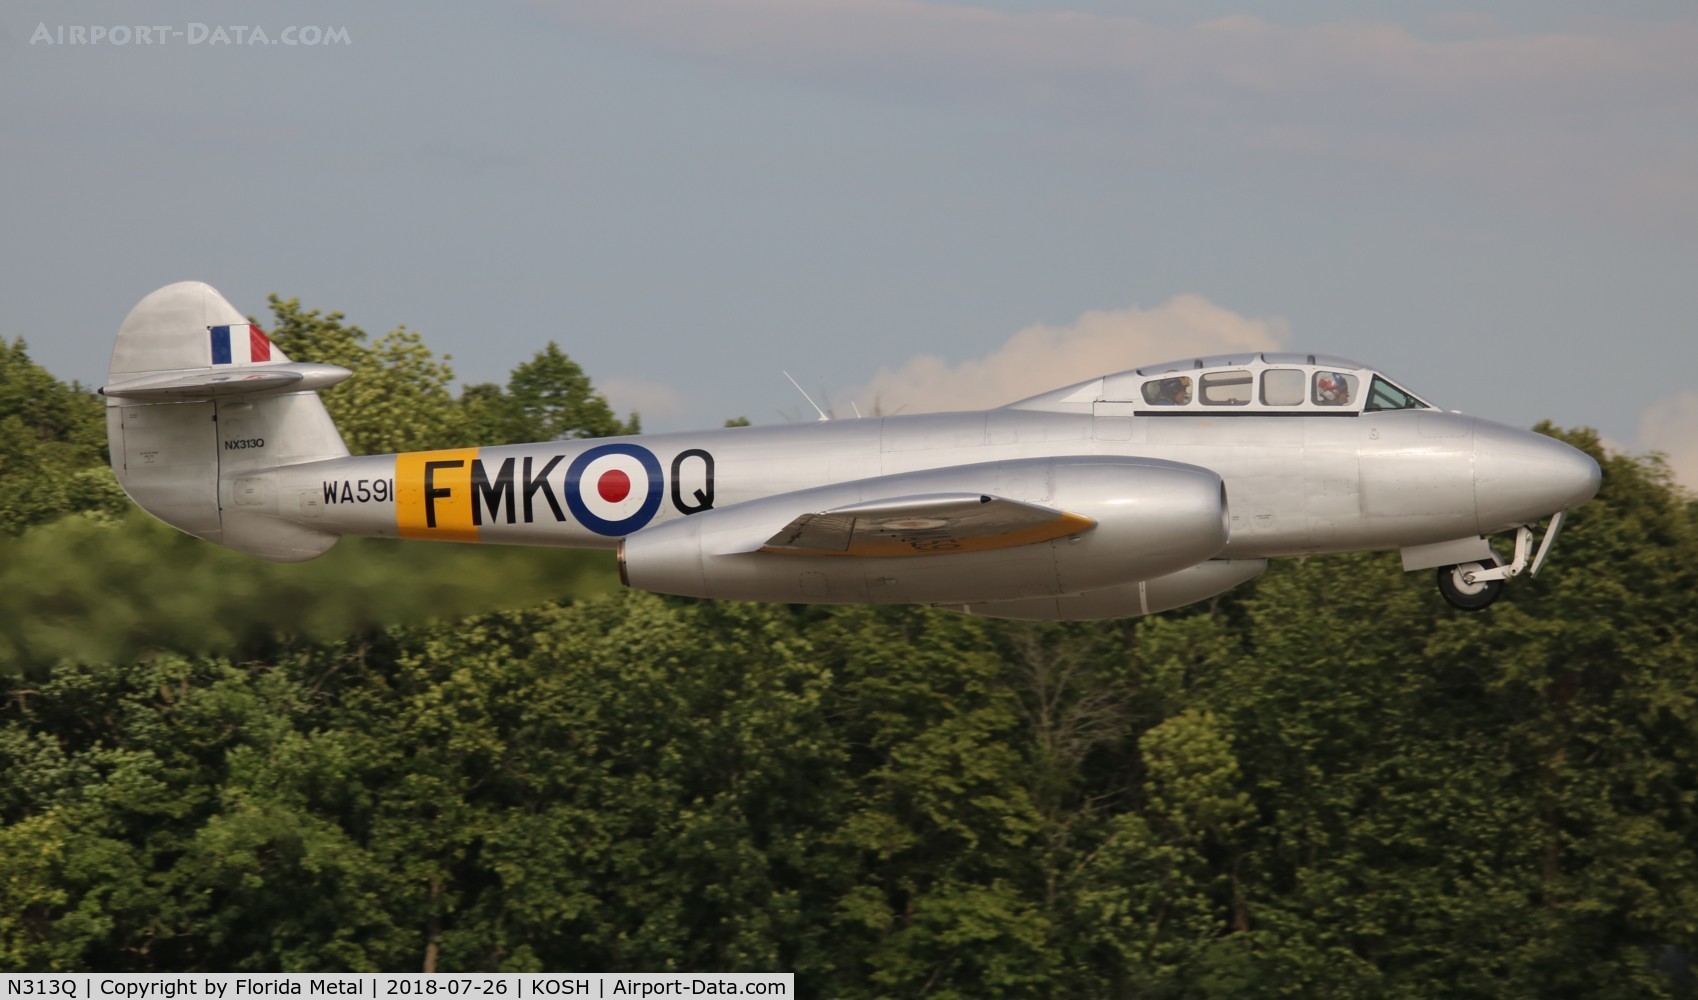 N313Q, 1949 Gloster Meteor T.7 C/N G5/356460, Gloster Meteor zx